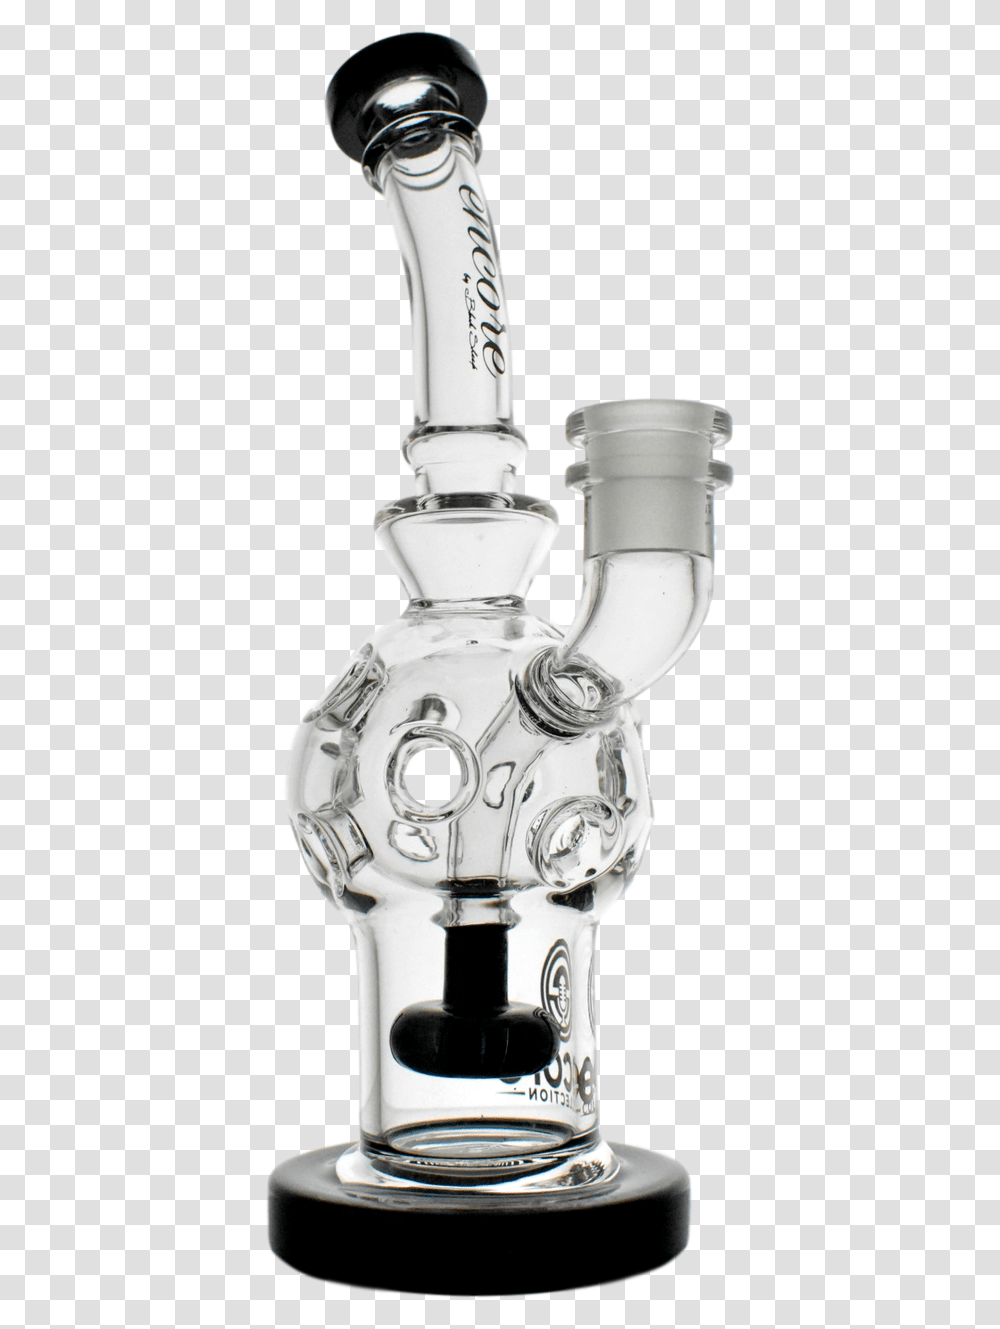 Trophy, Plumbing, Pottery, Fire Hydrant, Jug Transparent Png